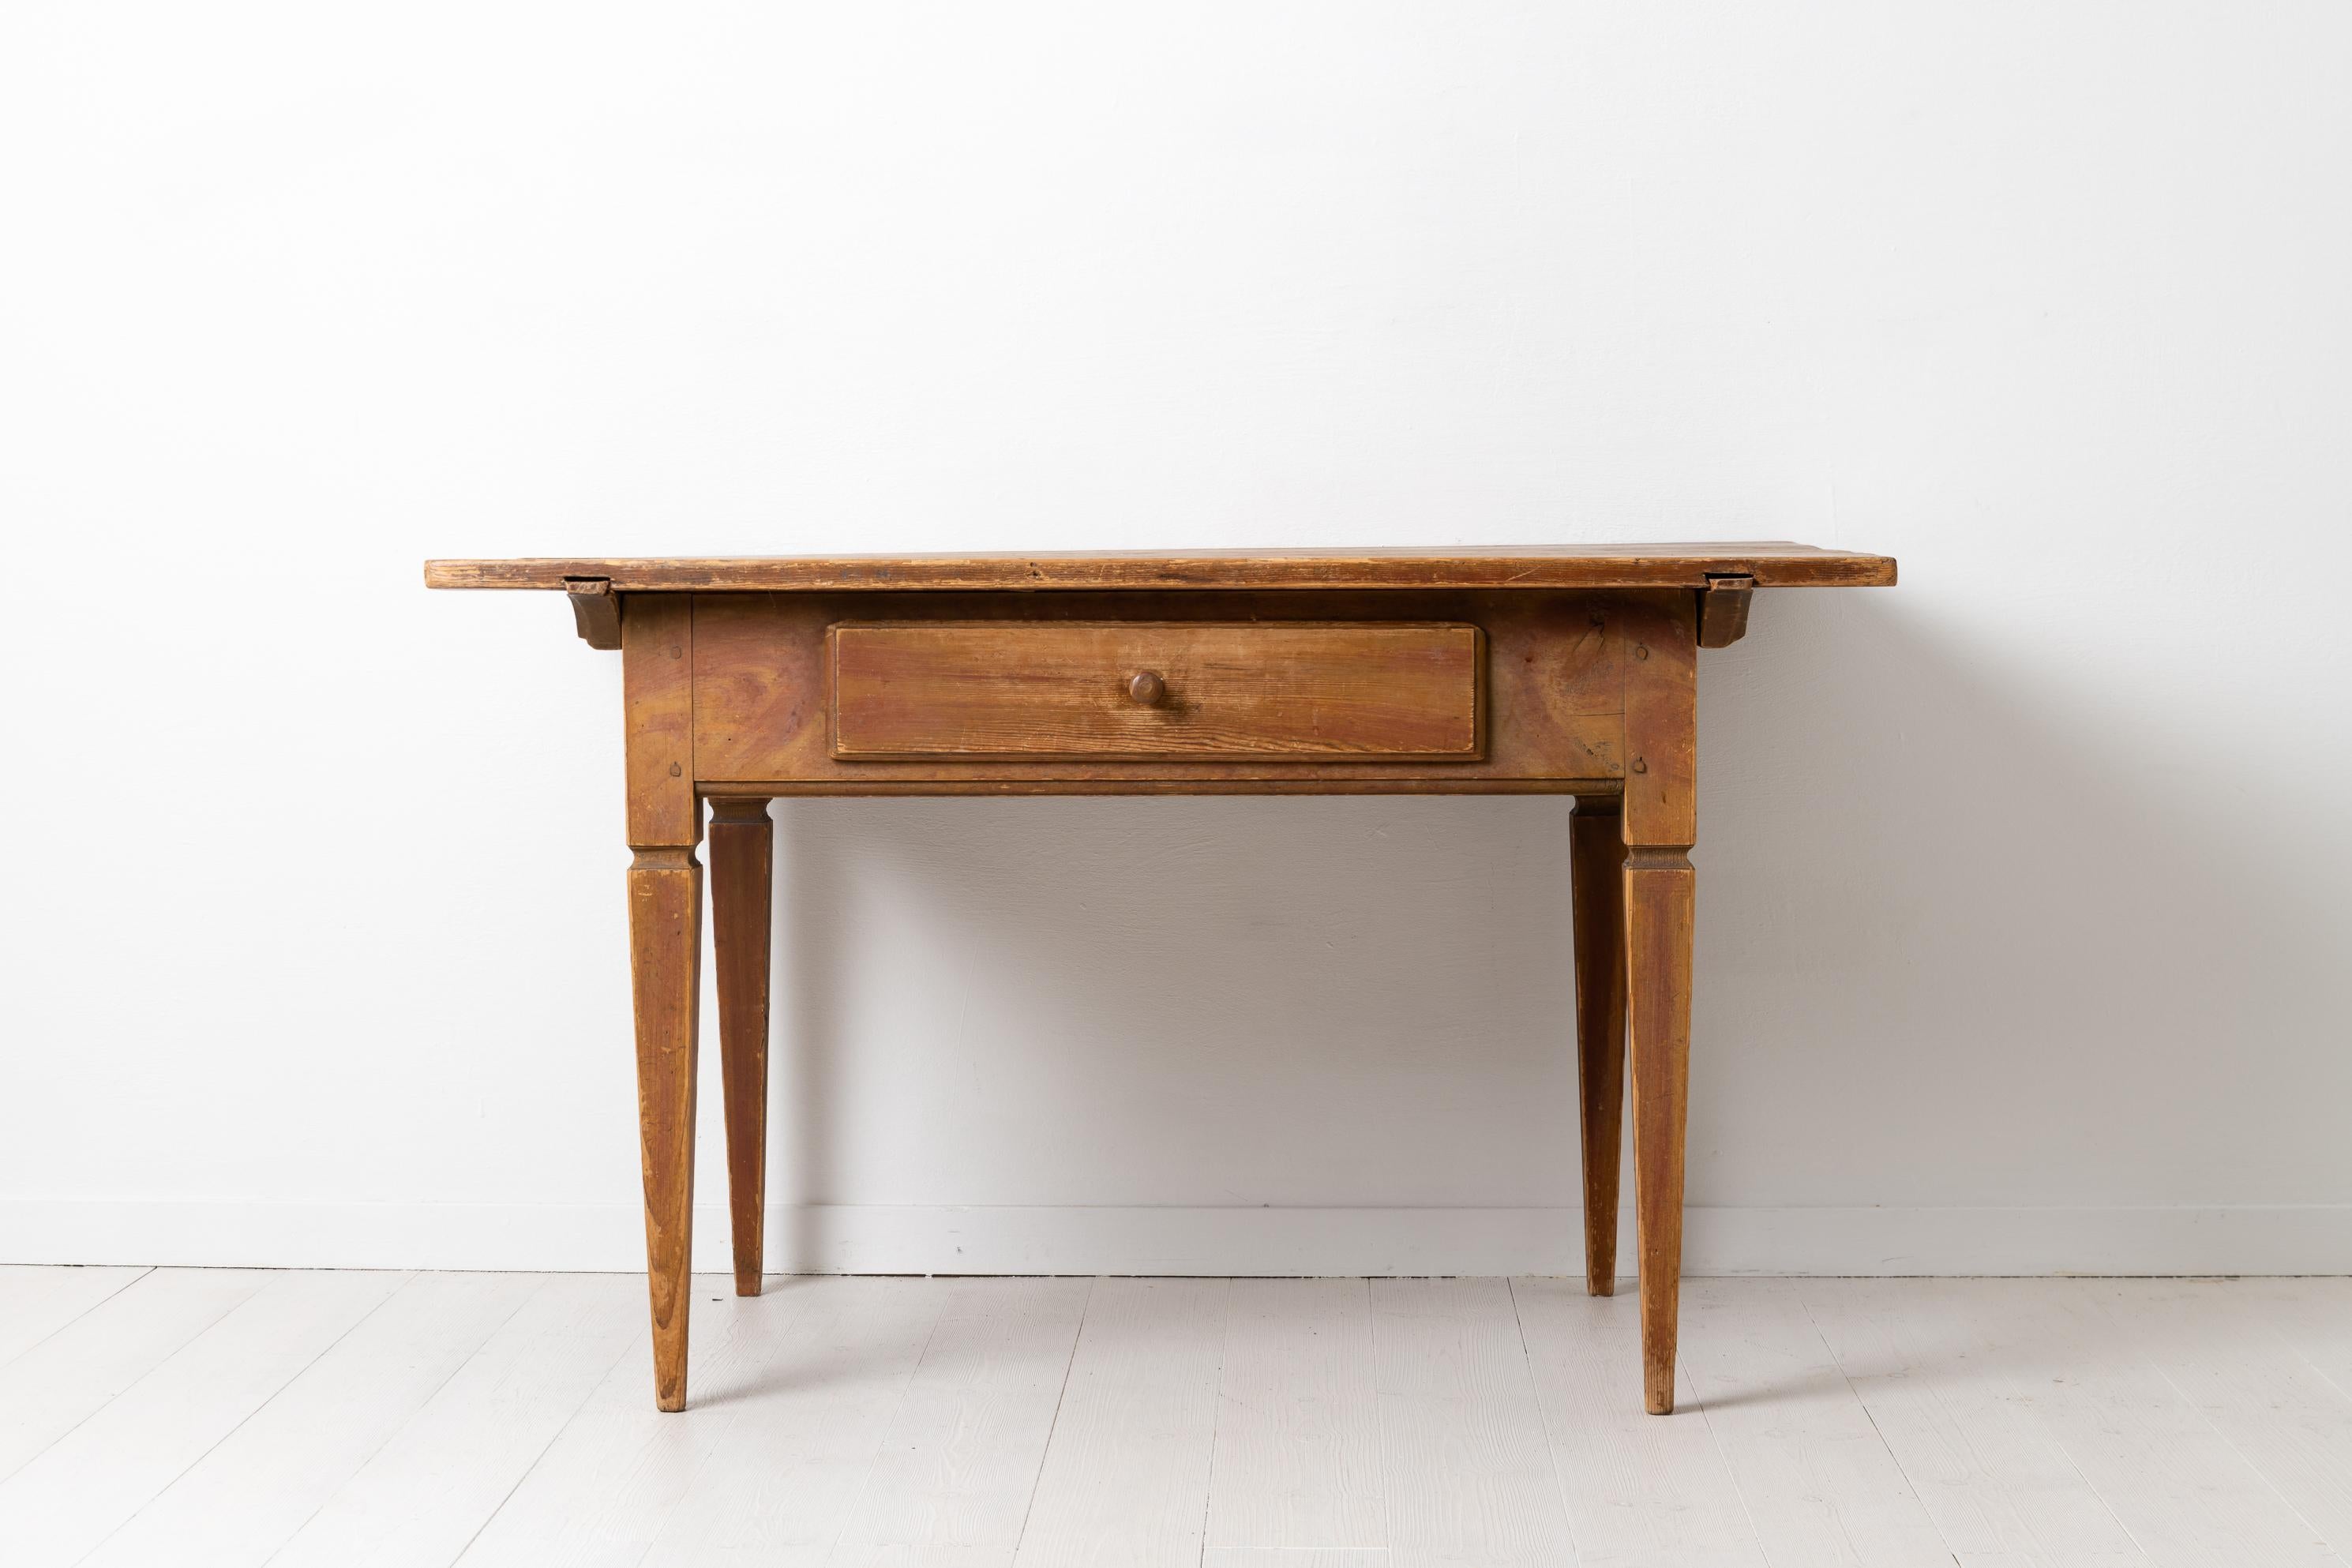 Hand-Crafted 18th Century Swedish Gustavian Country Furniture Table